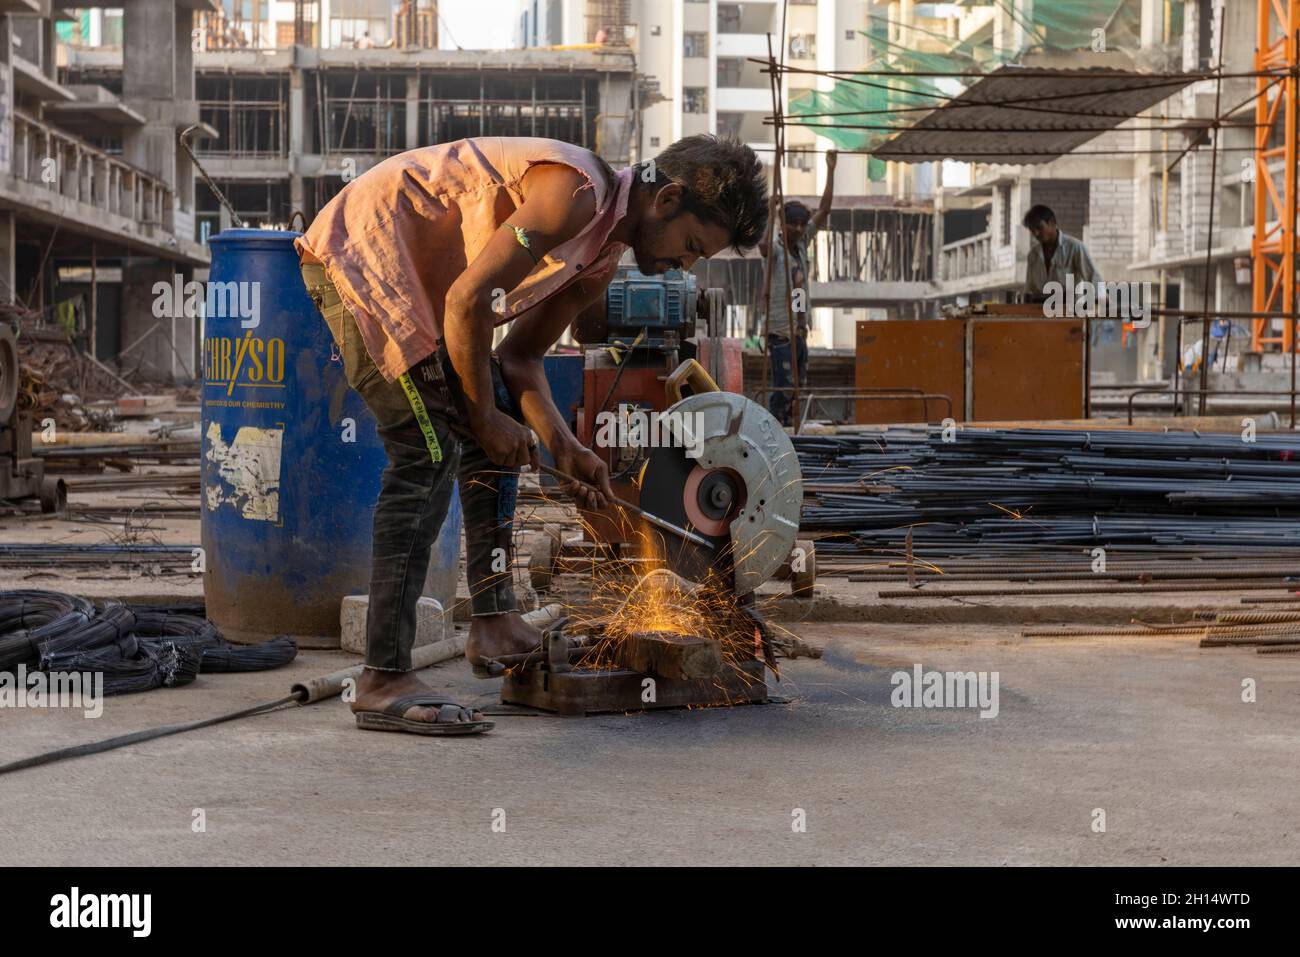 A daily wage labourer cutting metal on a construction site Stock Photo